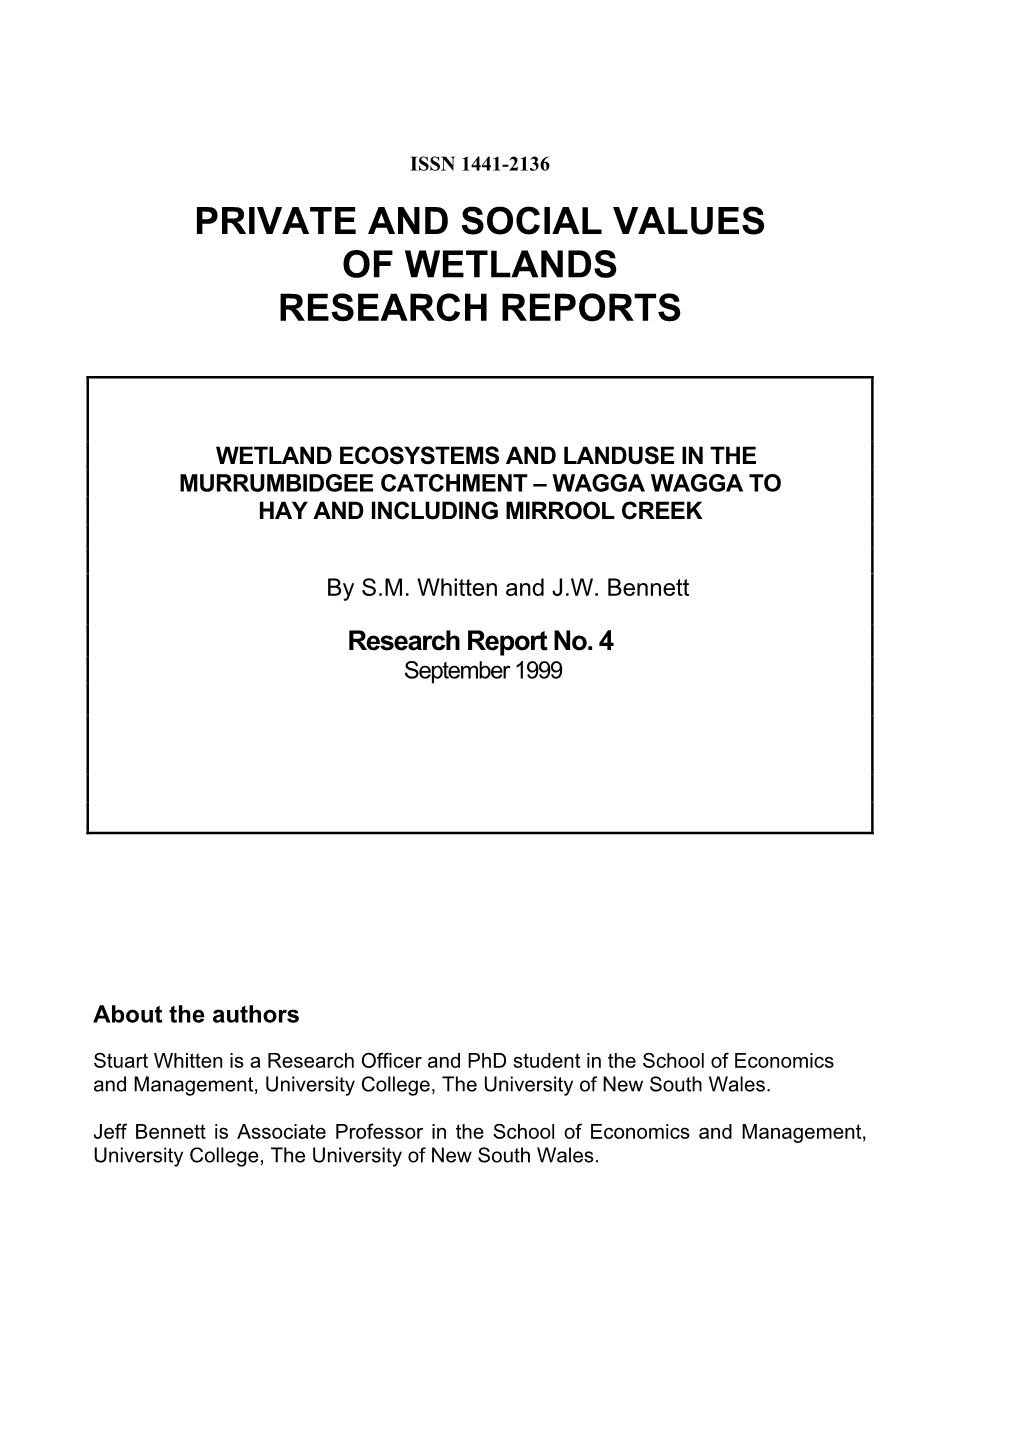 Private and Social Values of Wetlands Research Reports